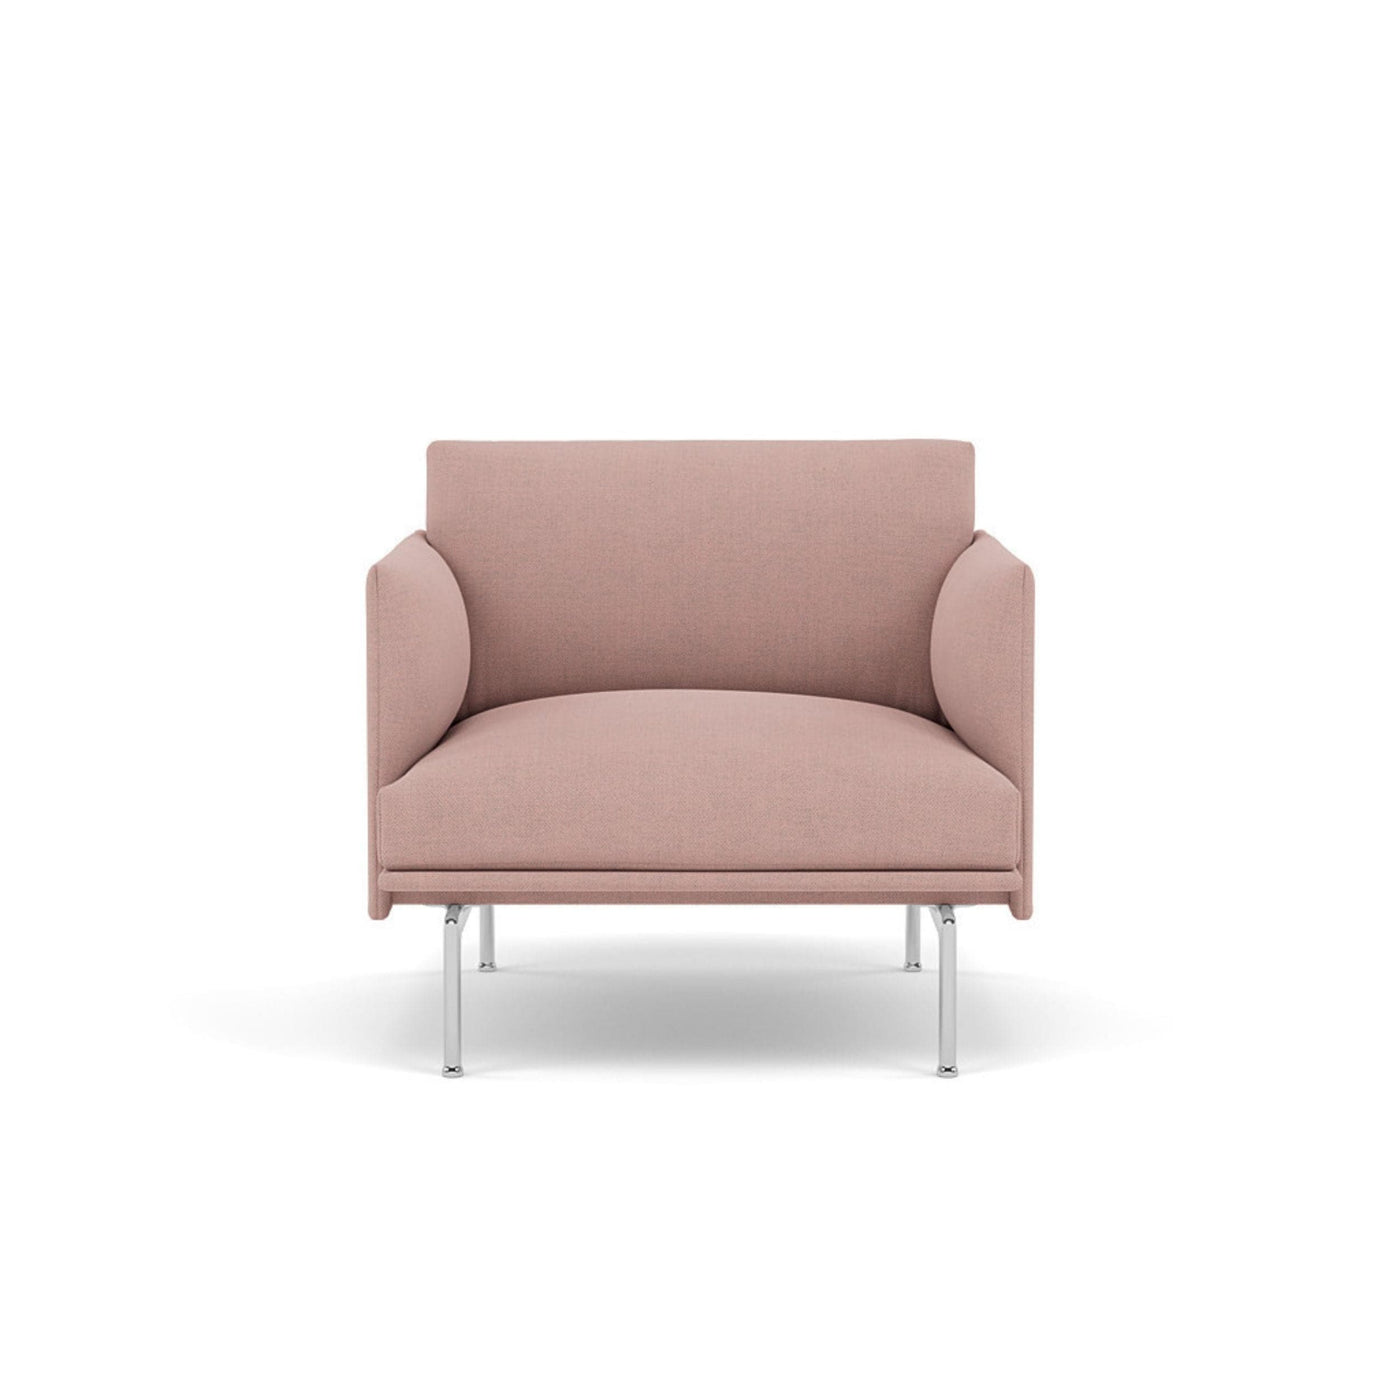 muuto outline studio chair in fiord 551 and polished aluminium legs. Available at someday designs. #colour_fiord-551